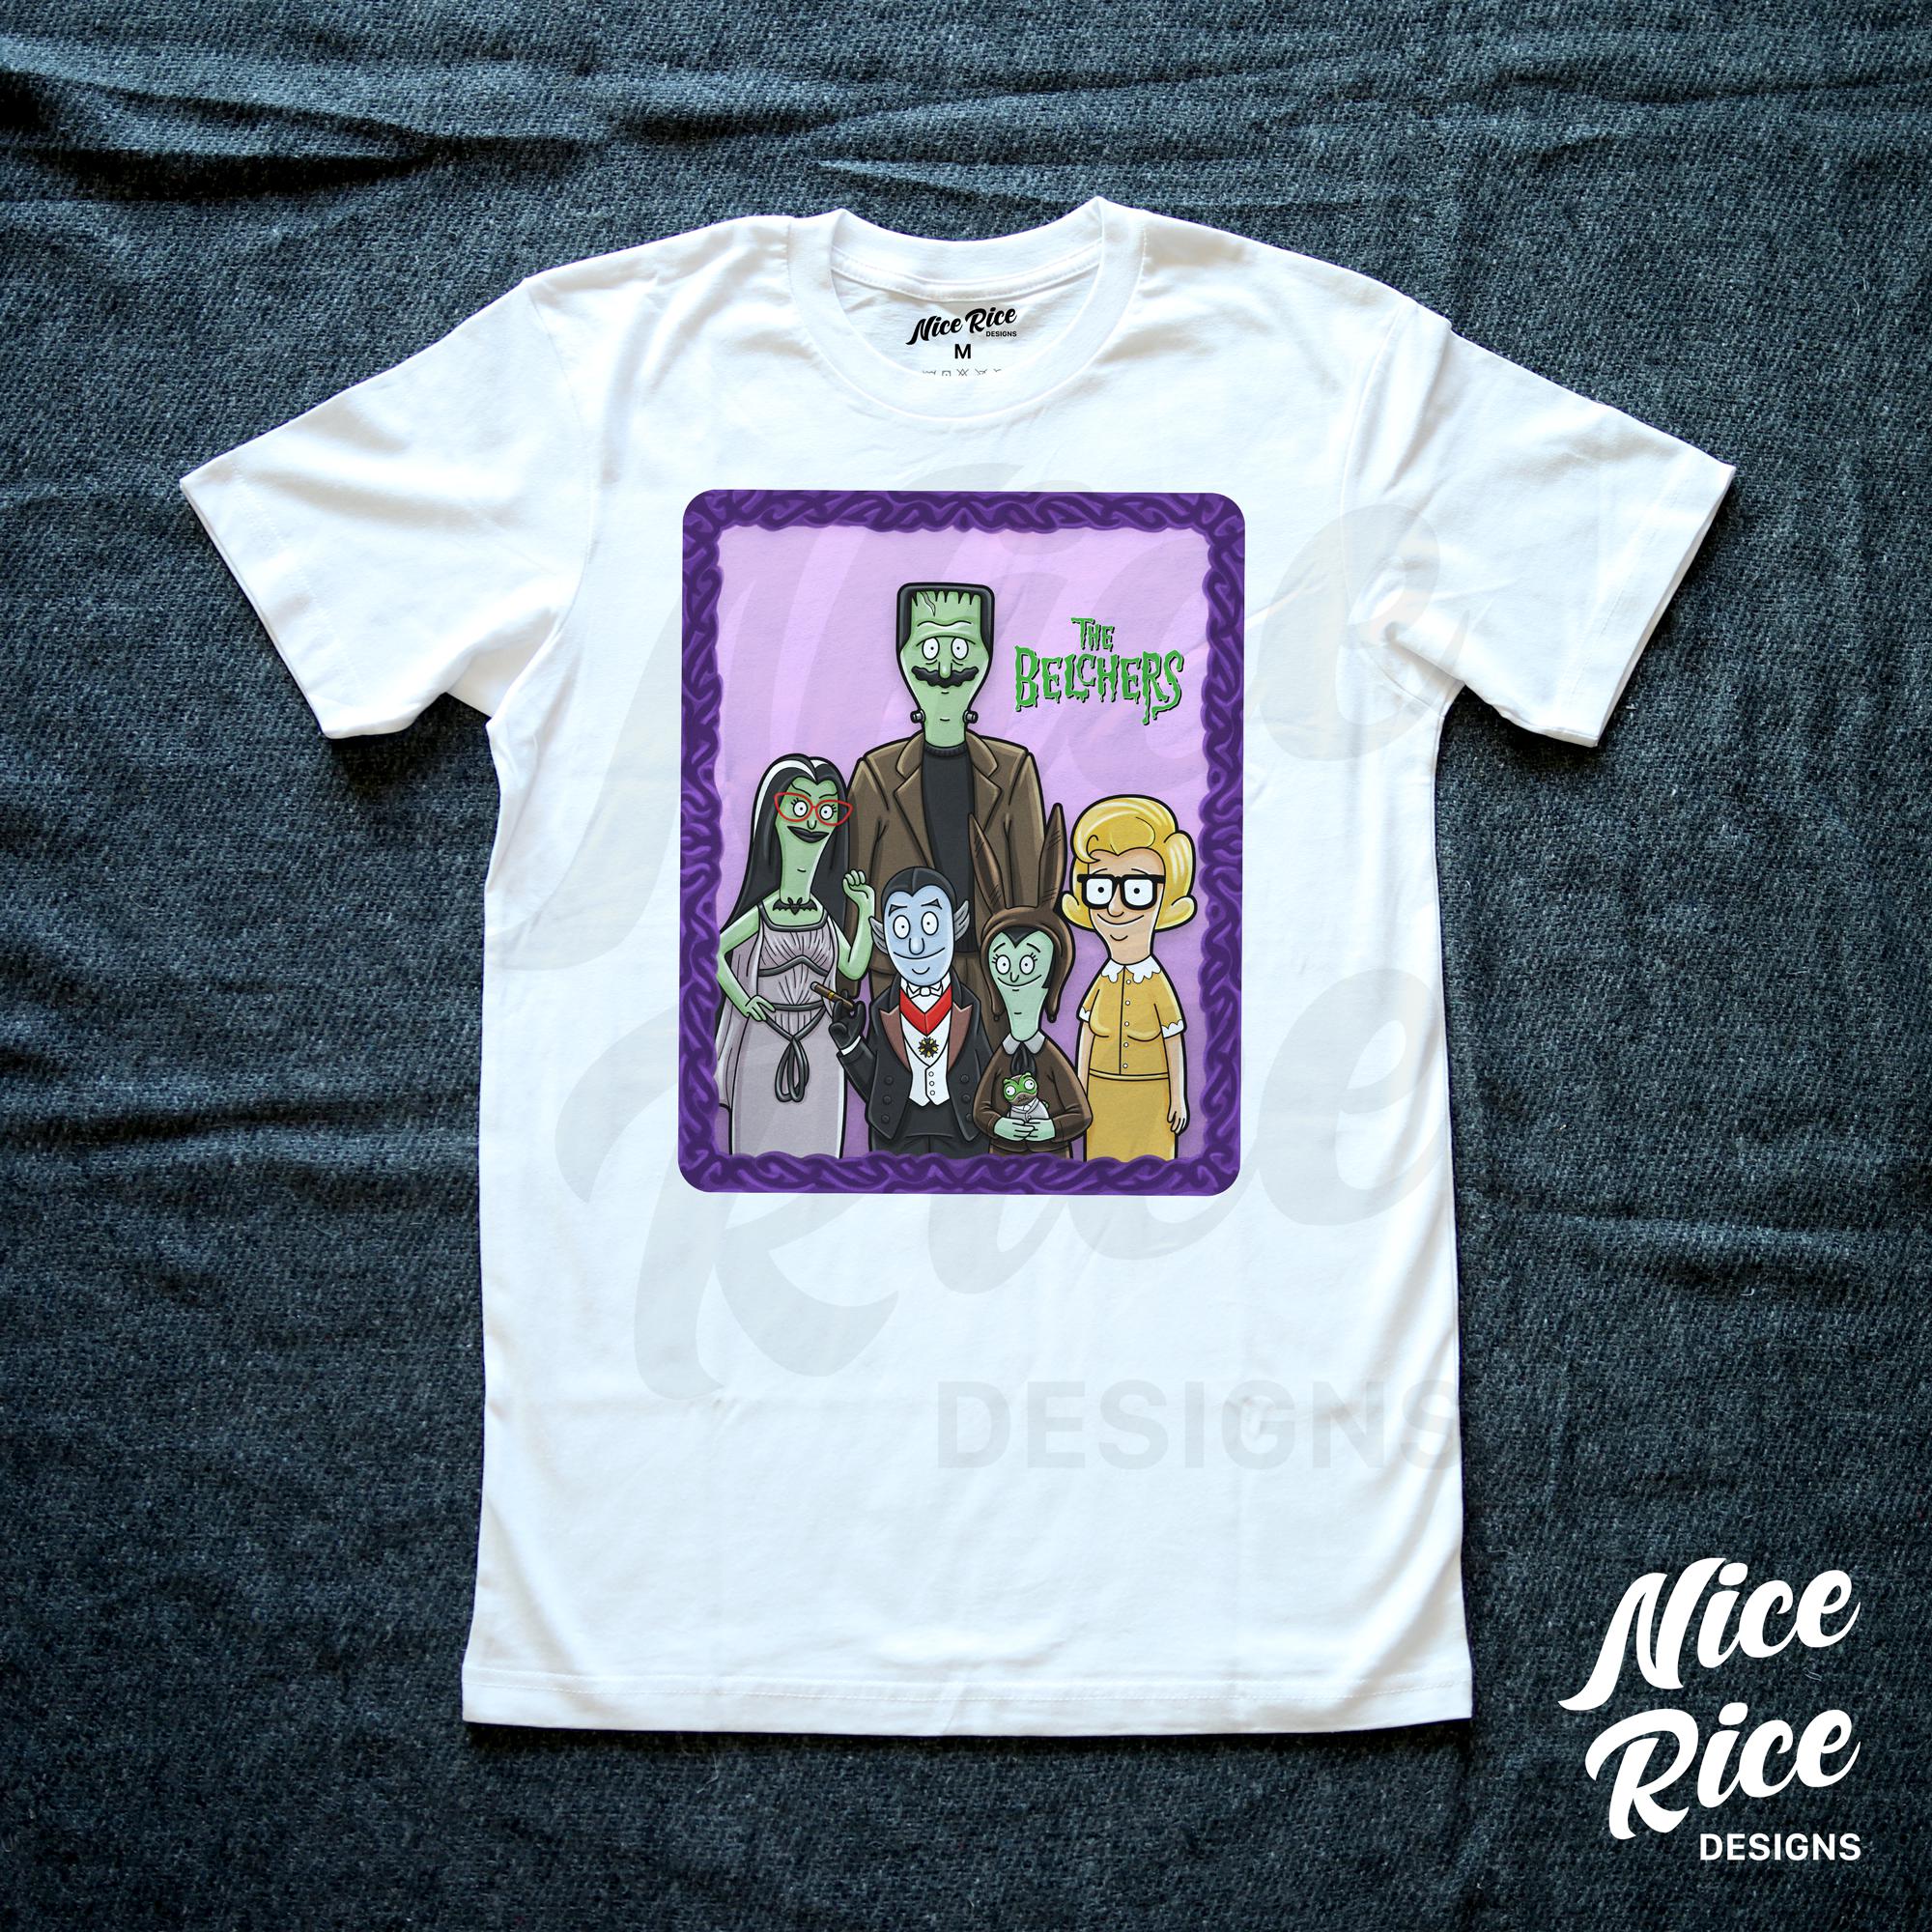 The Munsters Shirt by Nice Rice Designs